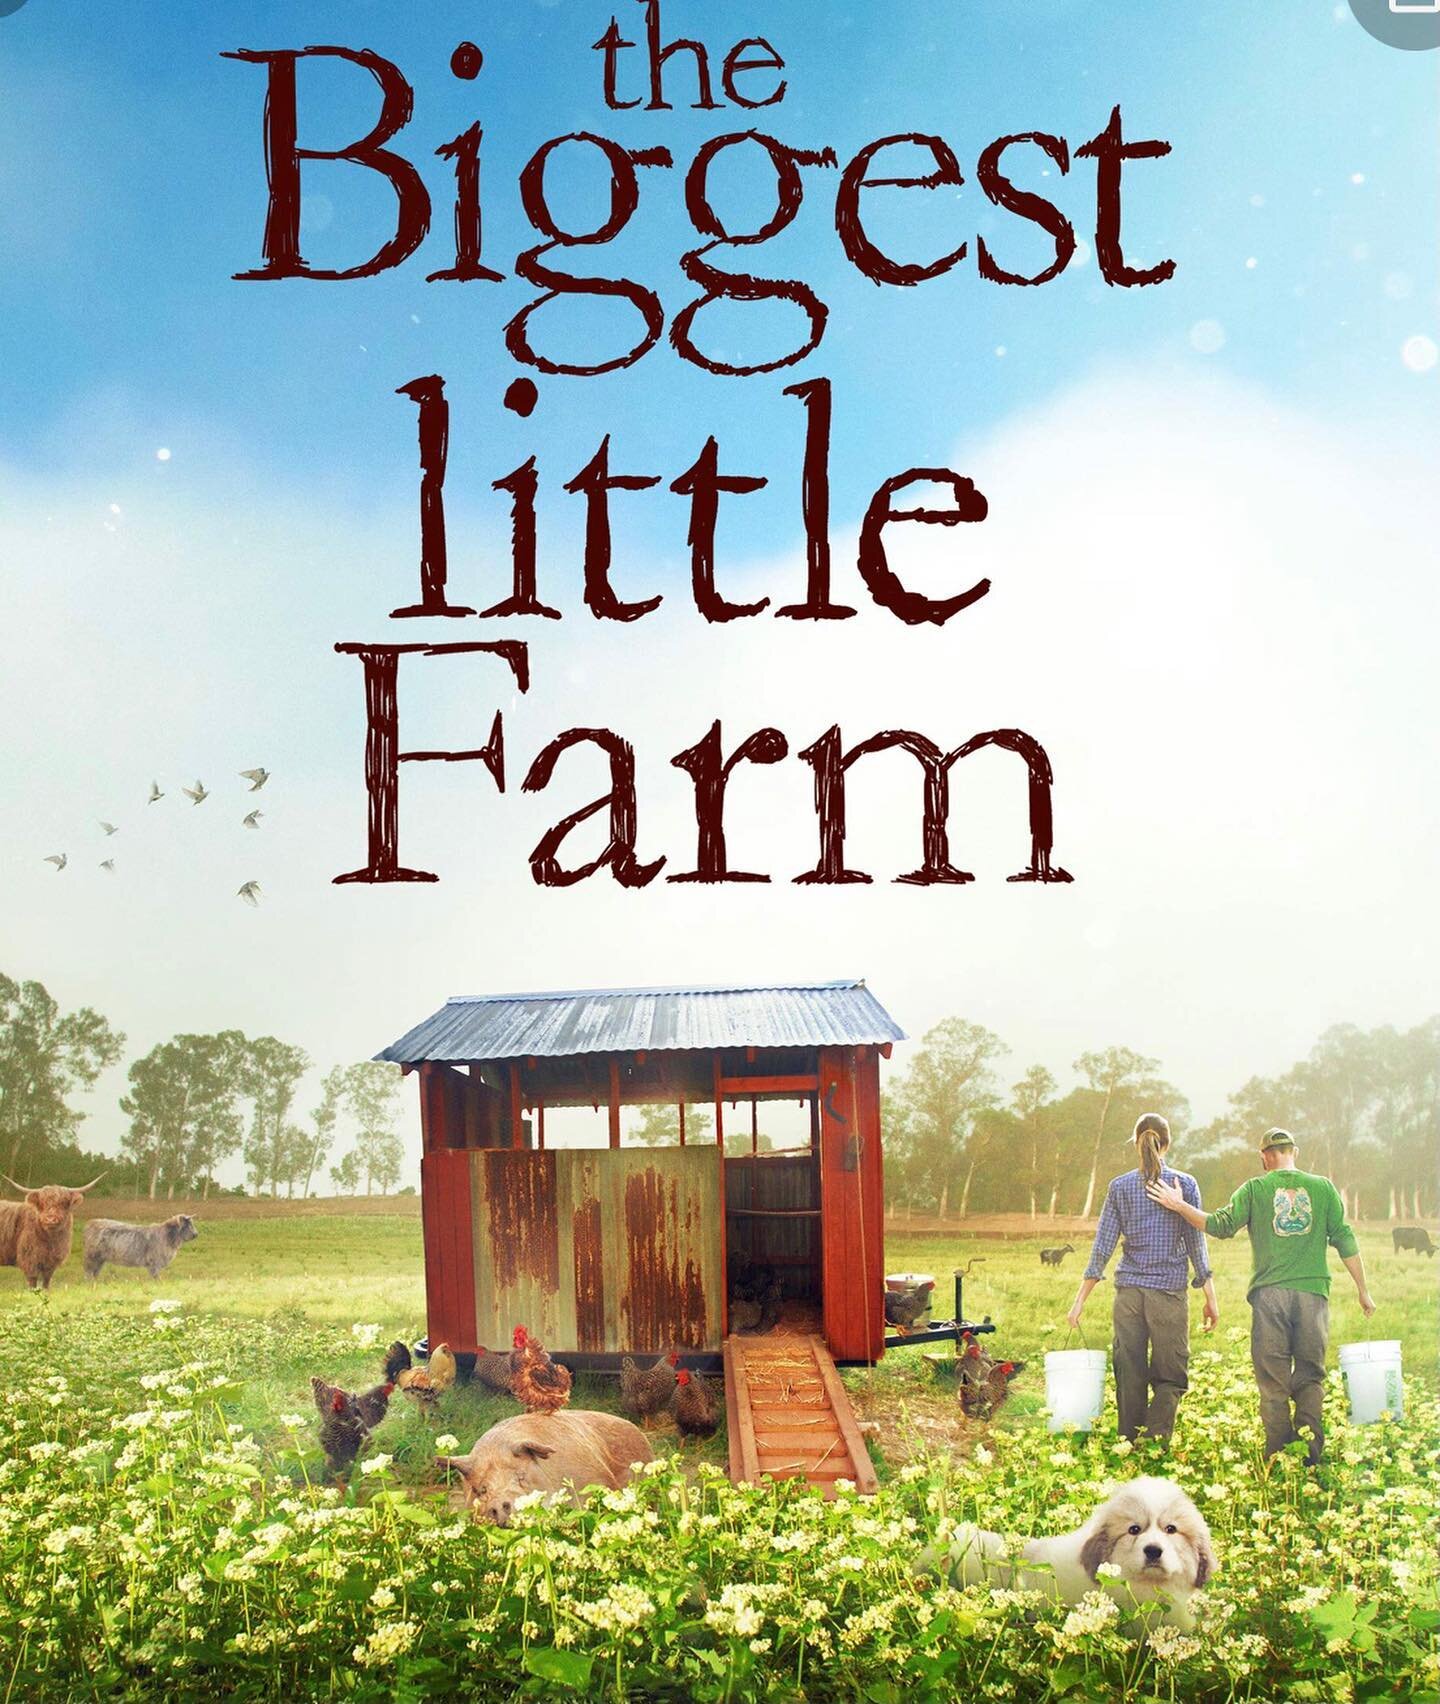 Friday, Gabri and I were included in a birthday trip for @directorrylee to @apricotlanefarms the subject of the most wonderful documentary The Biggest Little Farm. It was a beautiful, educational, and inspiring day for all of us!! I will never forget